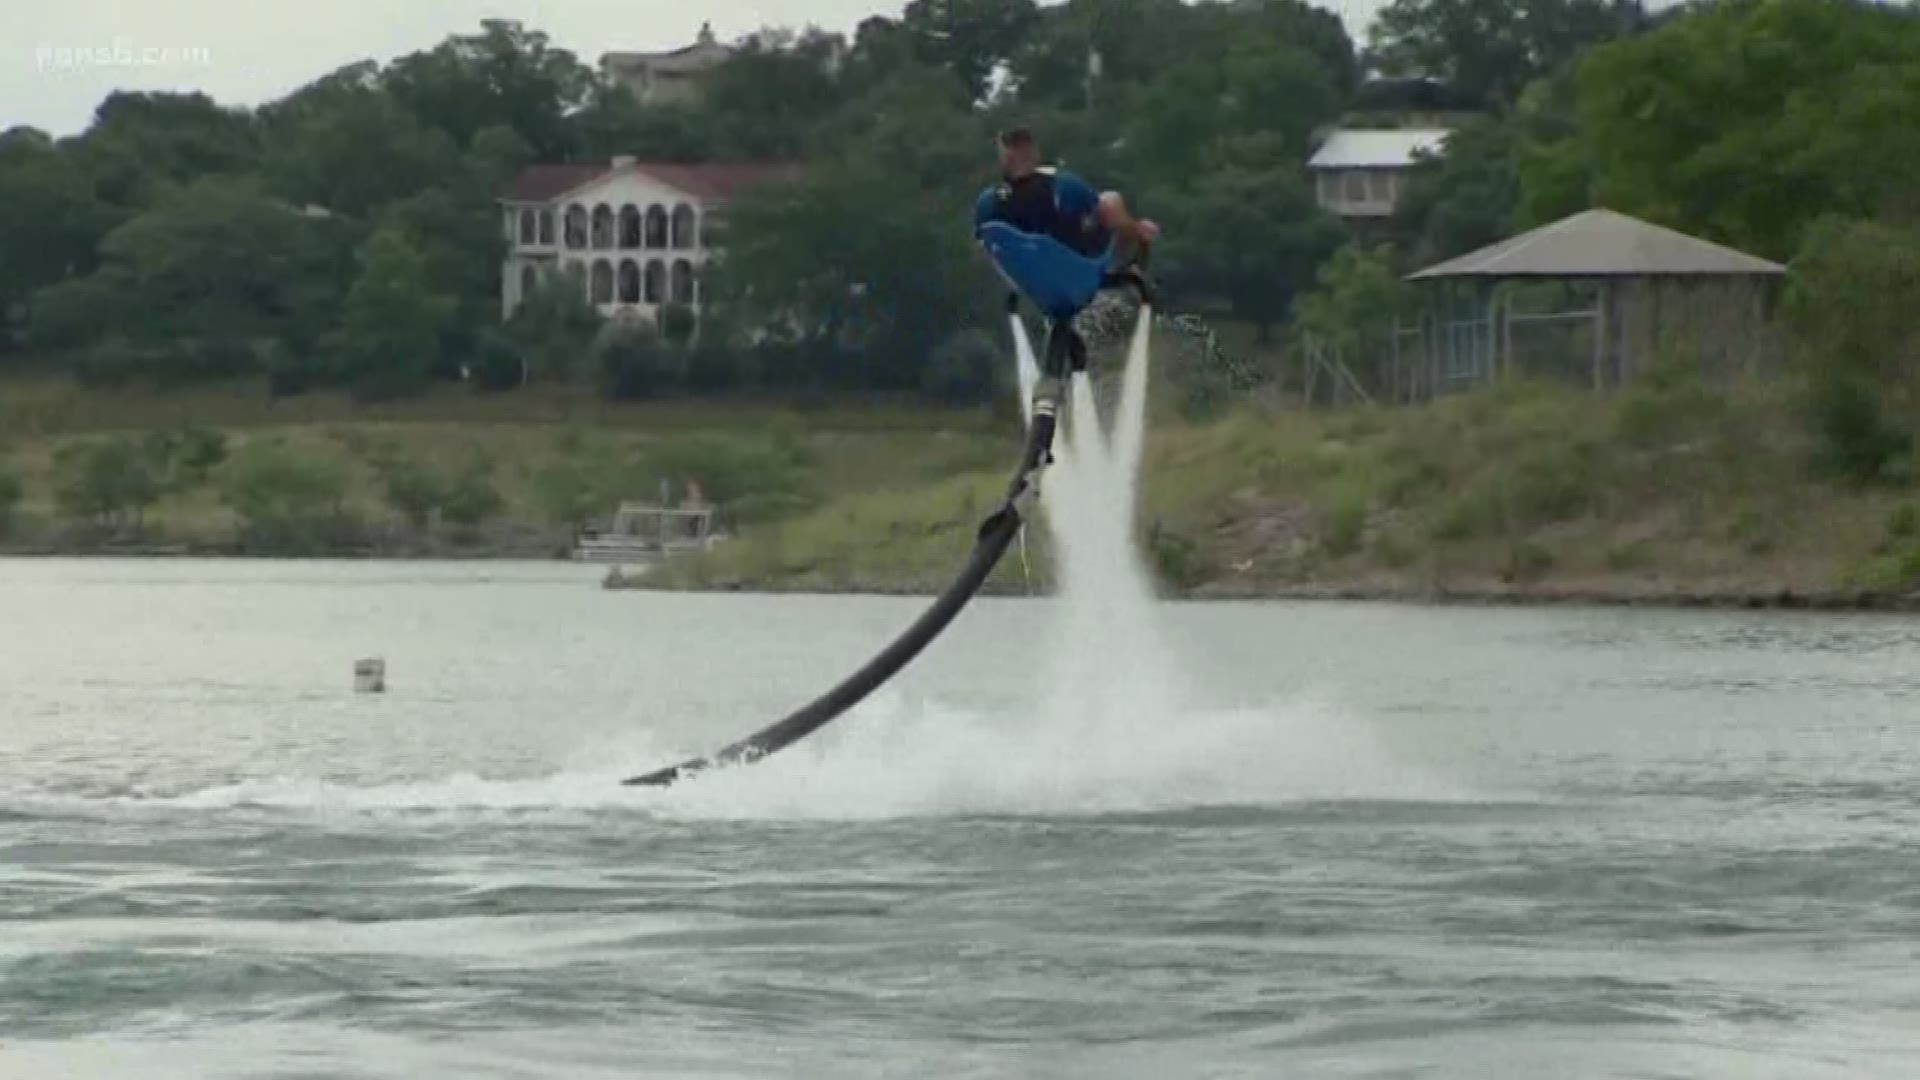 We have a ton of opportunities to enjoy the water here, from tubing to kayaking, to water skiing. In this week's Texas Outdoors, Barry Davis takes a ride (and a couple of falls) on the Jetovator at Canyon Lake.